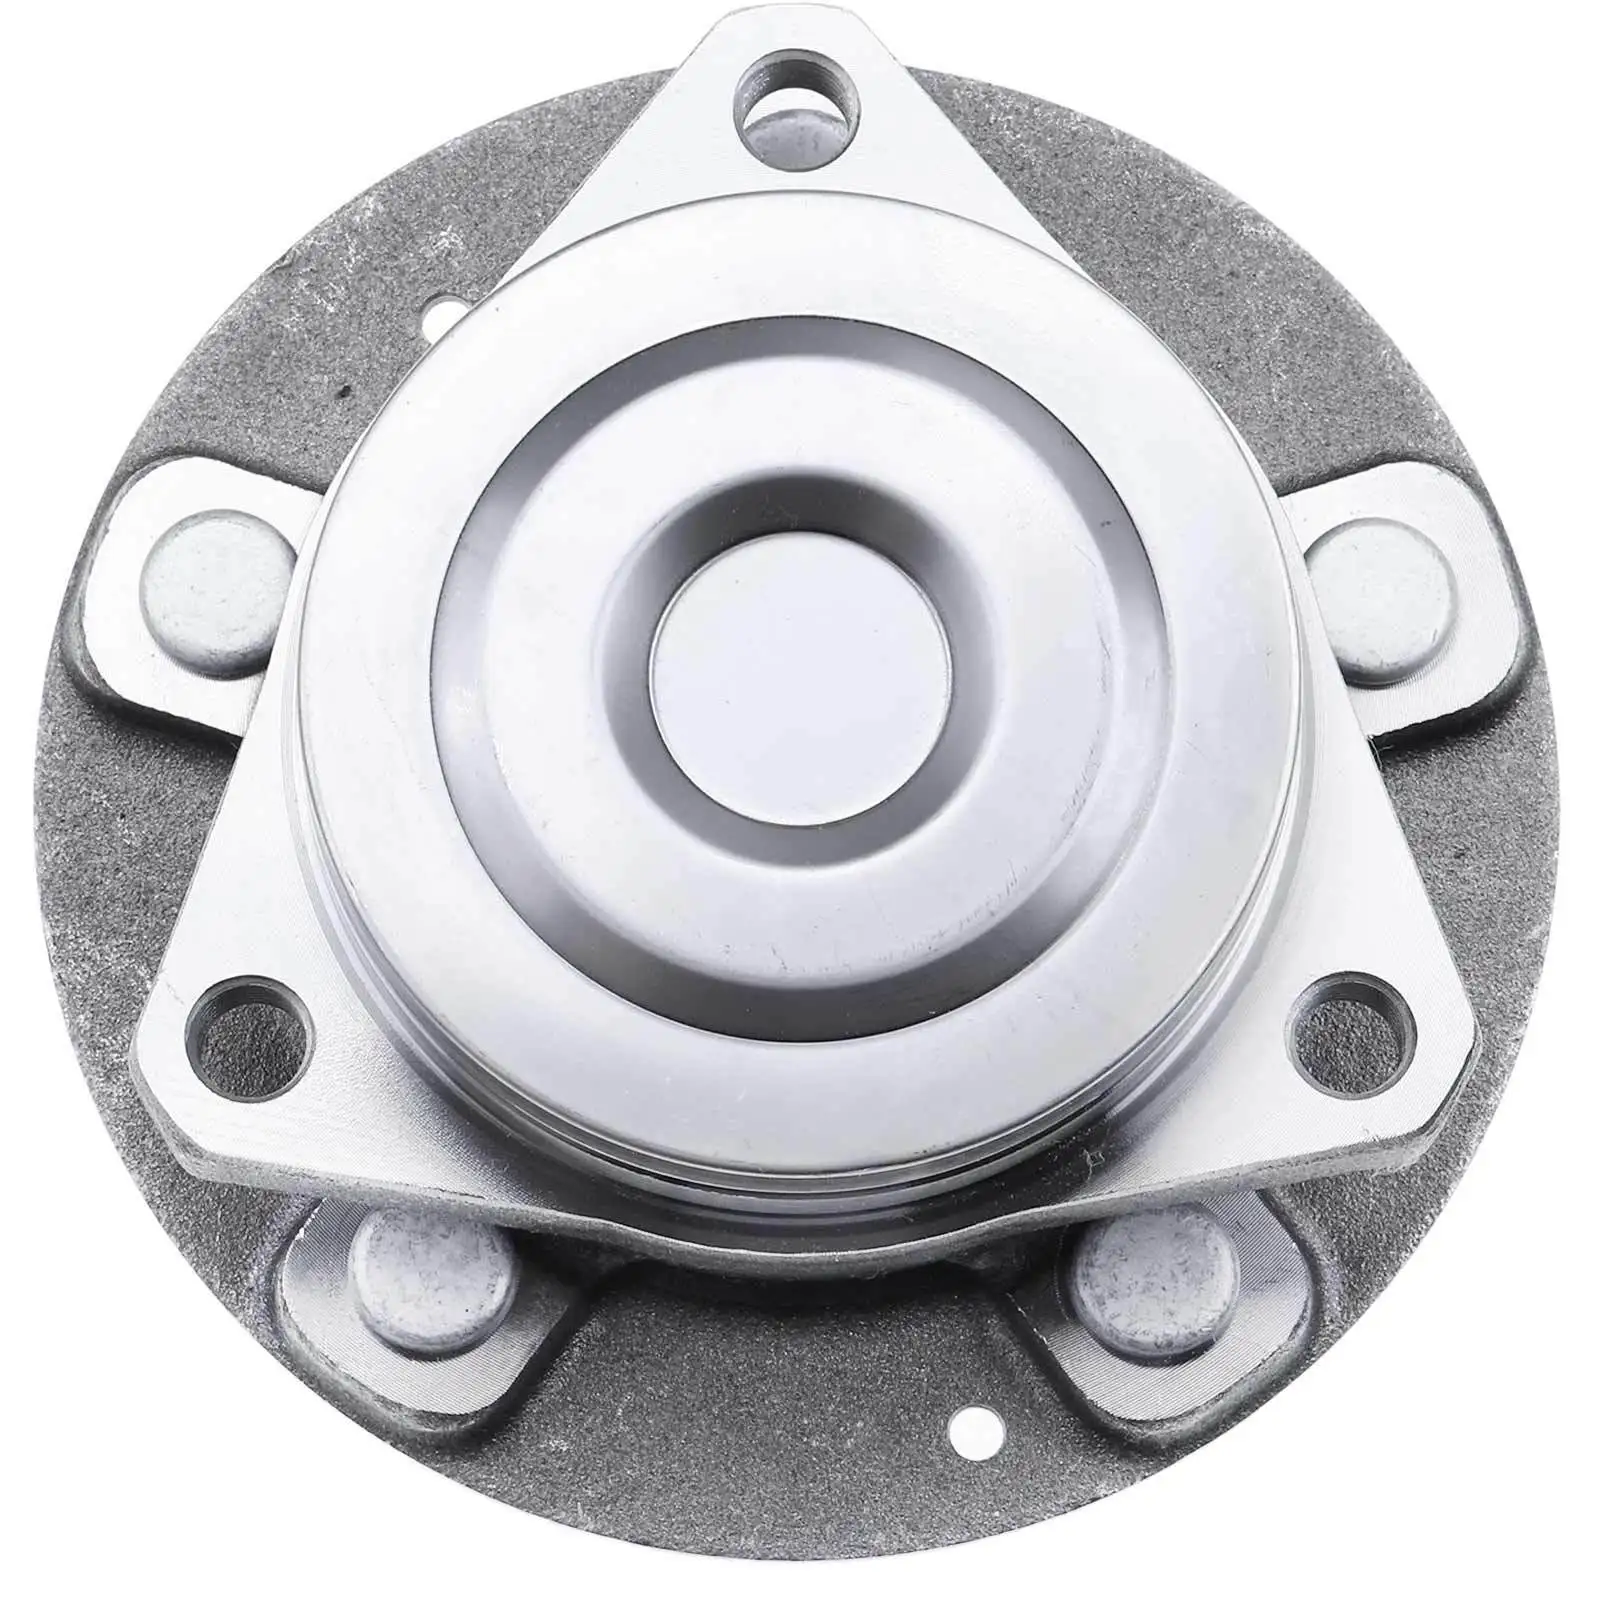 

A3 Wholesales Rear LH or RH Wheel Hub Bearing Assembly for Chevy Malibu 16-19 Buick Envision